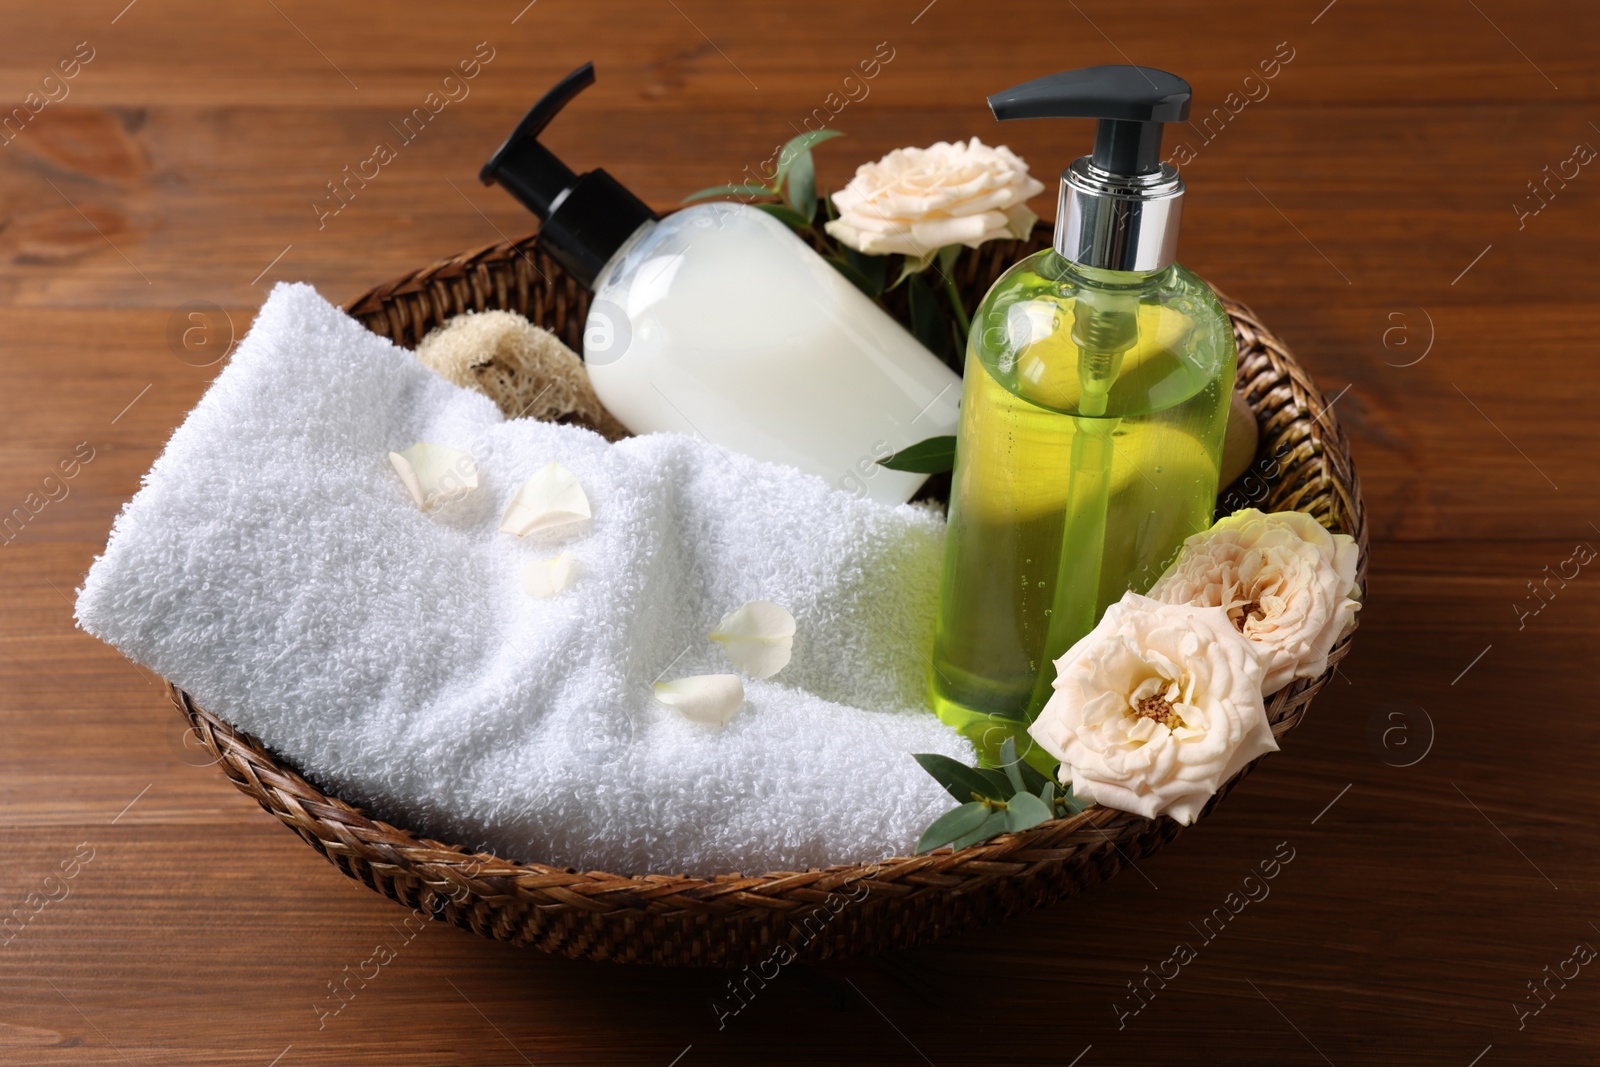 Photo of Dispensers of liquid soap, towel and roses in wicker basket on wooden table